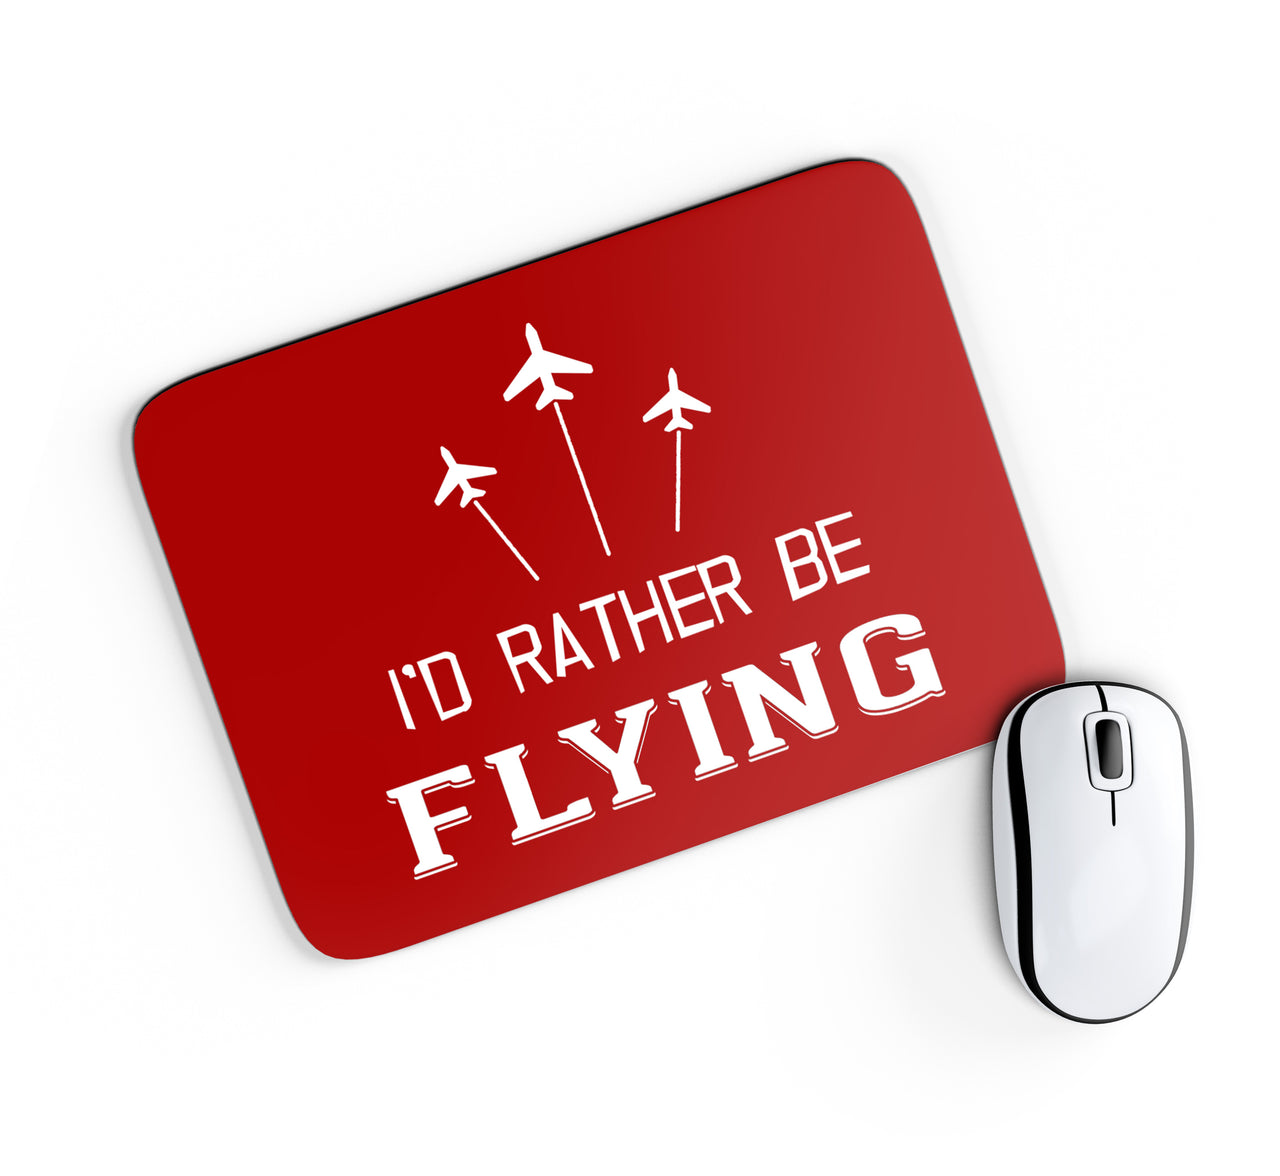 I'D Rather Be Flying Designed Mouse Pads